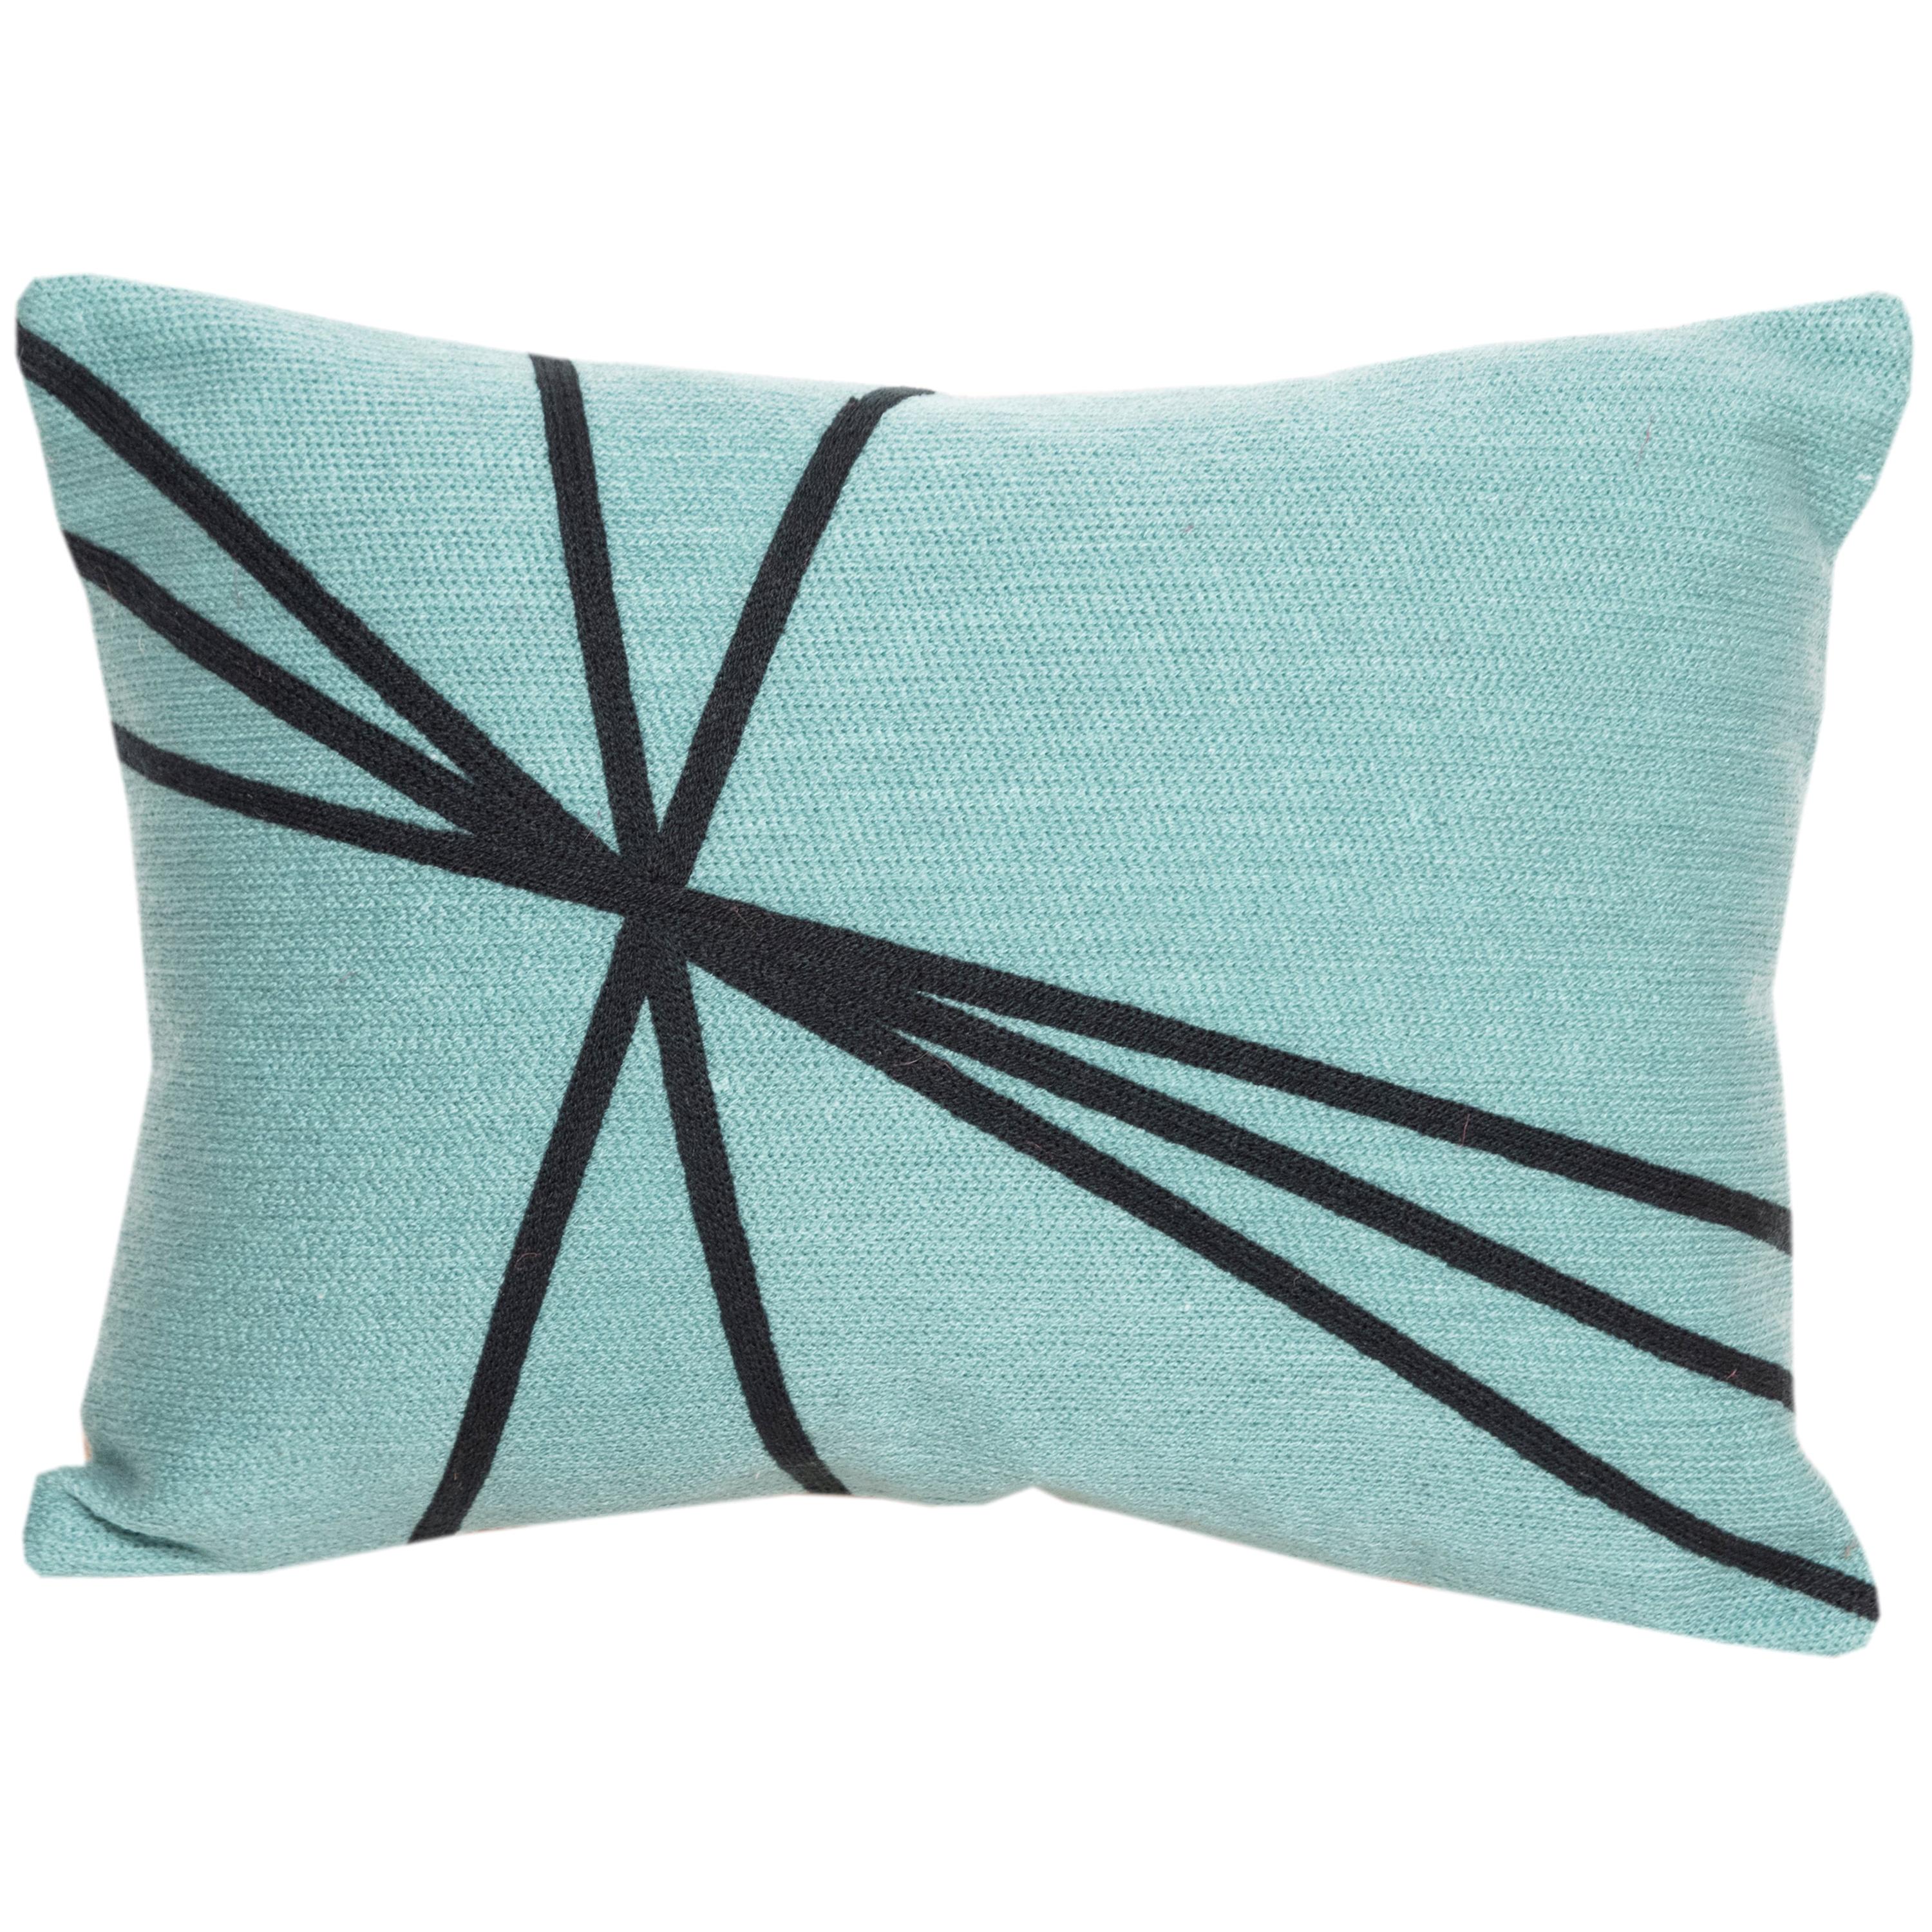 Modern Kilombo Home Embroidery Pillow Cushion Cotton Turquoise Navy blue For Sale